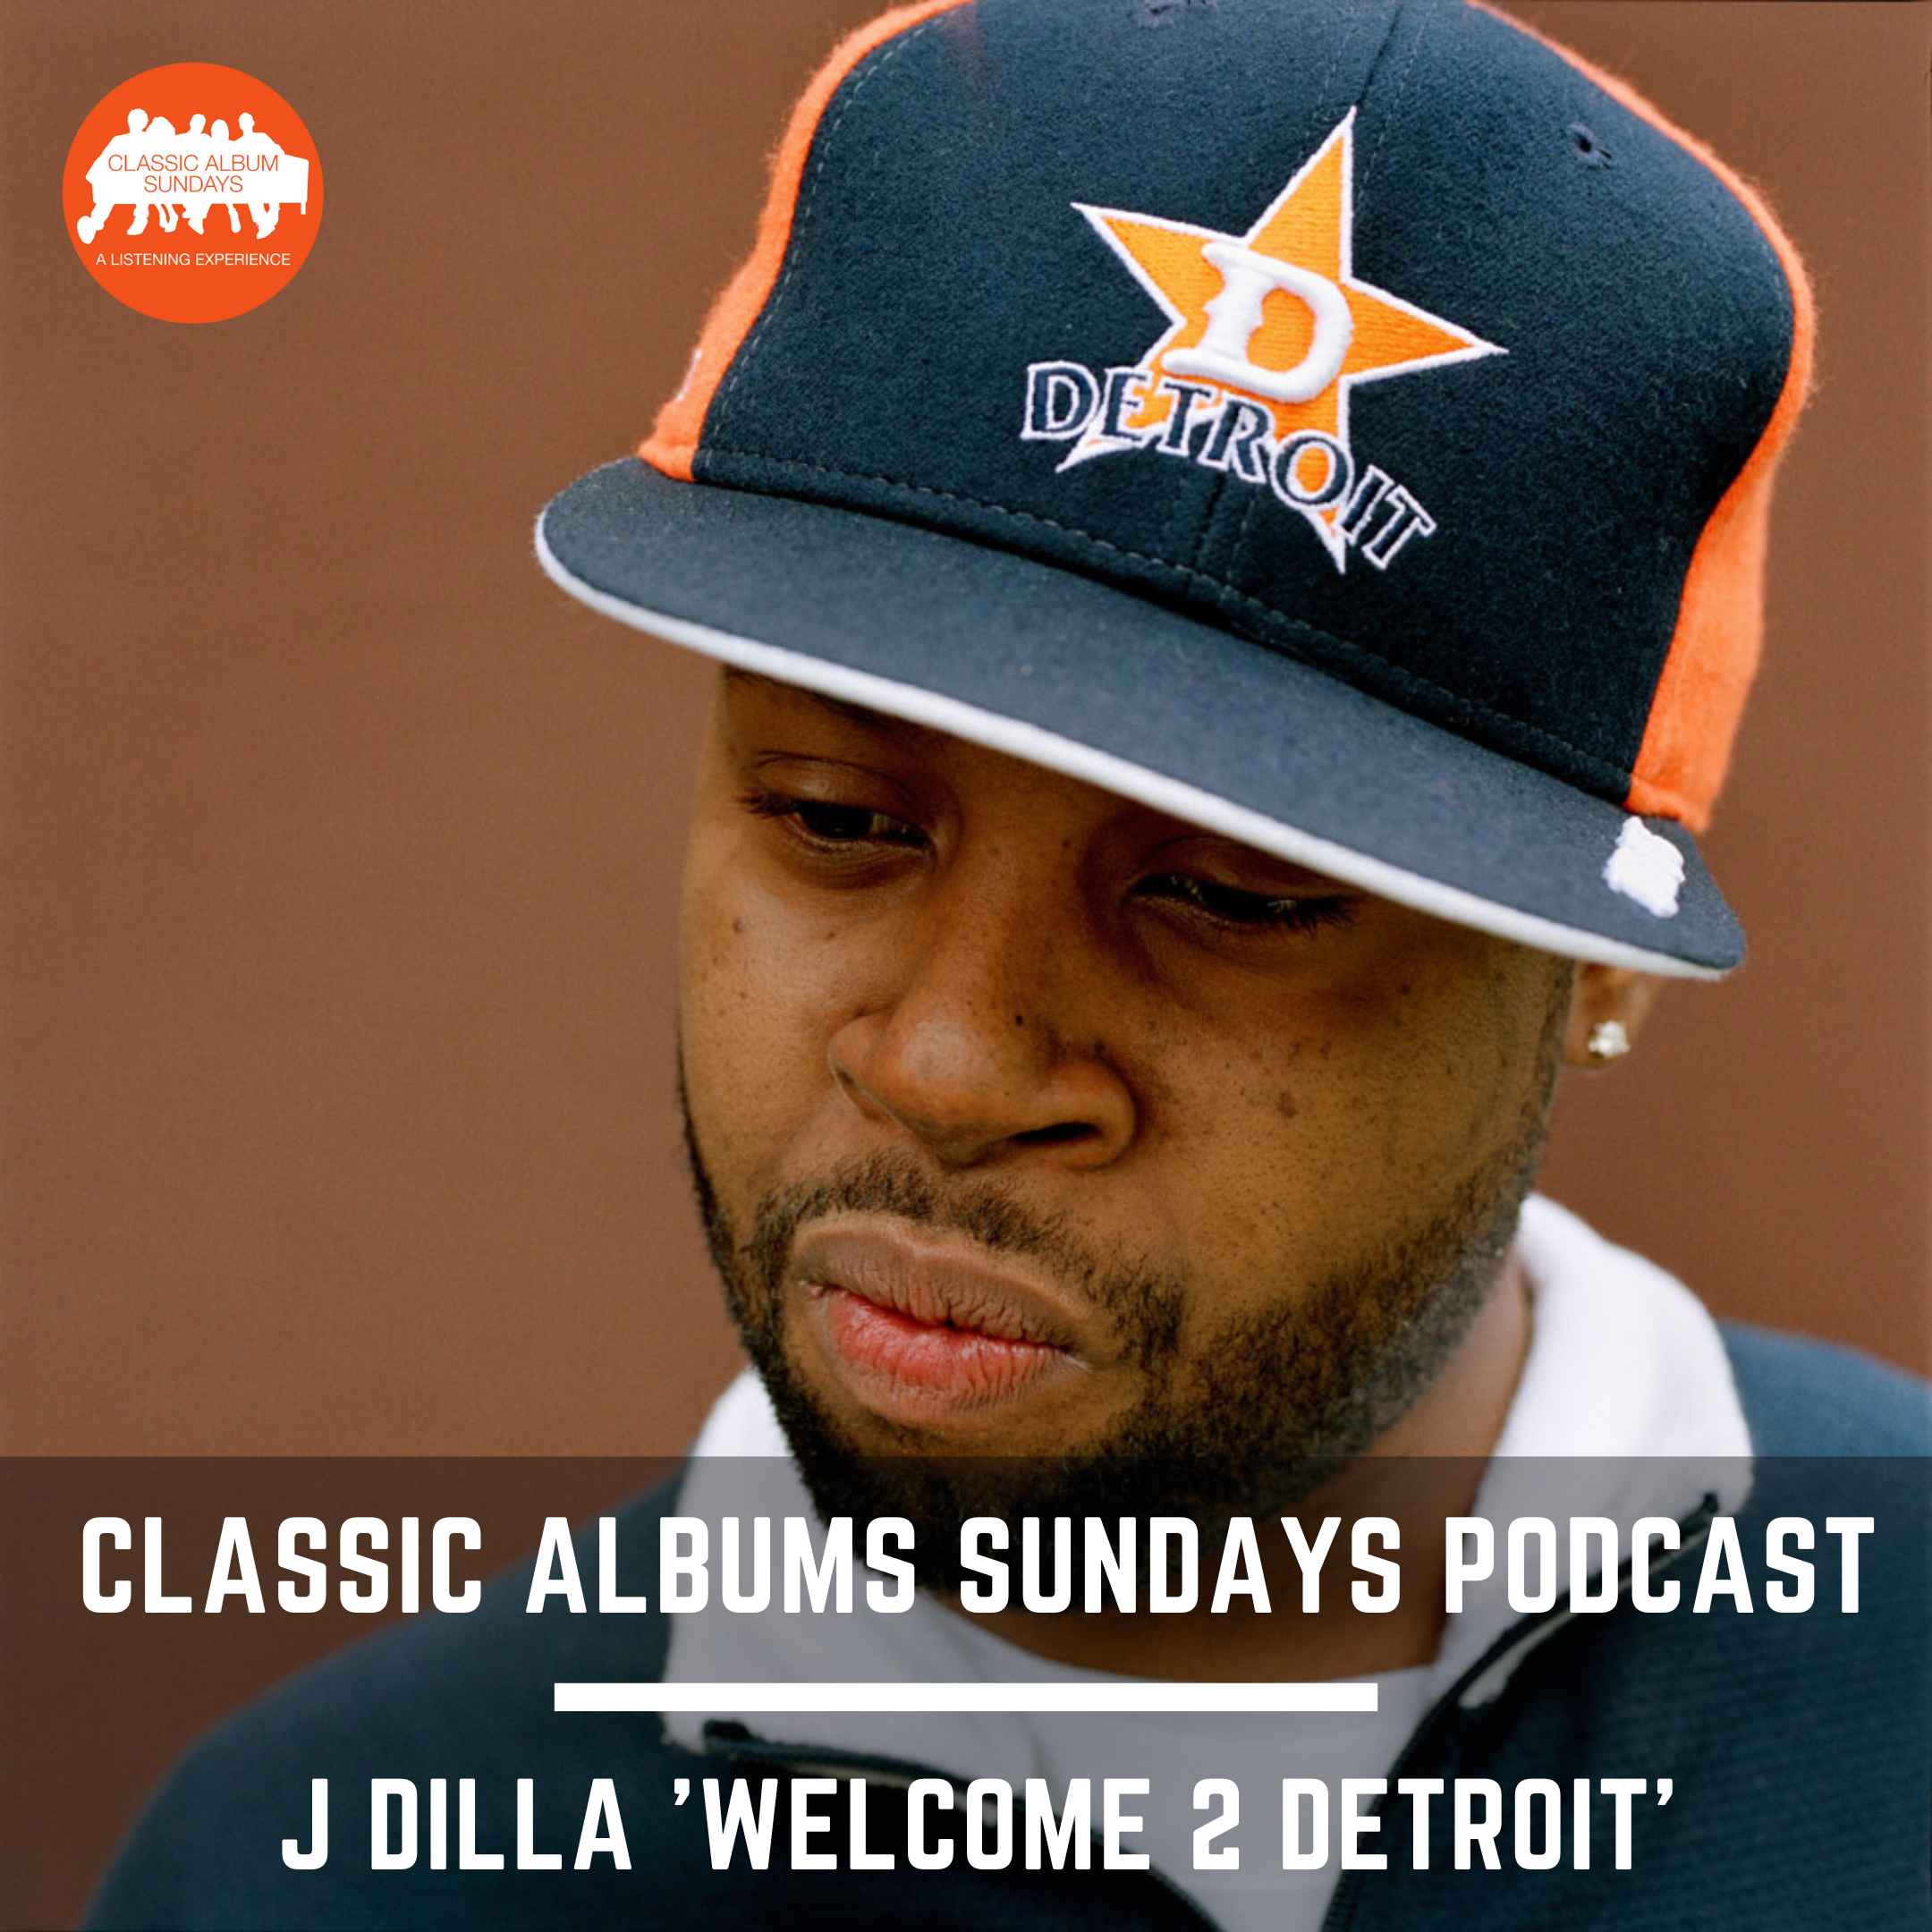 Classic Album Sundays Podcast: J Dilla 'Welcome 2 Detroit' with Amp Fiddler